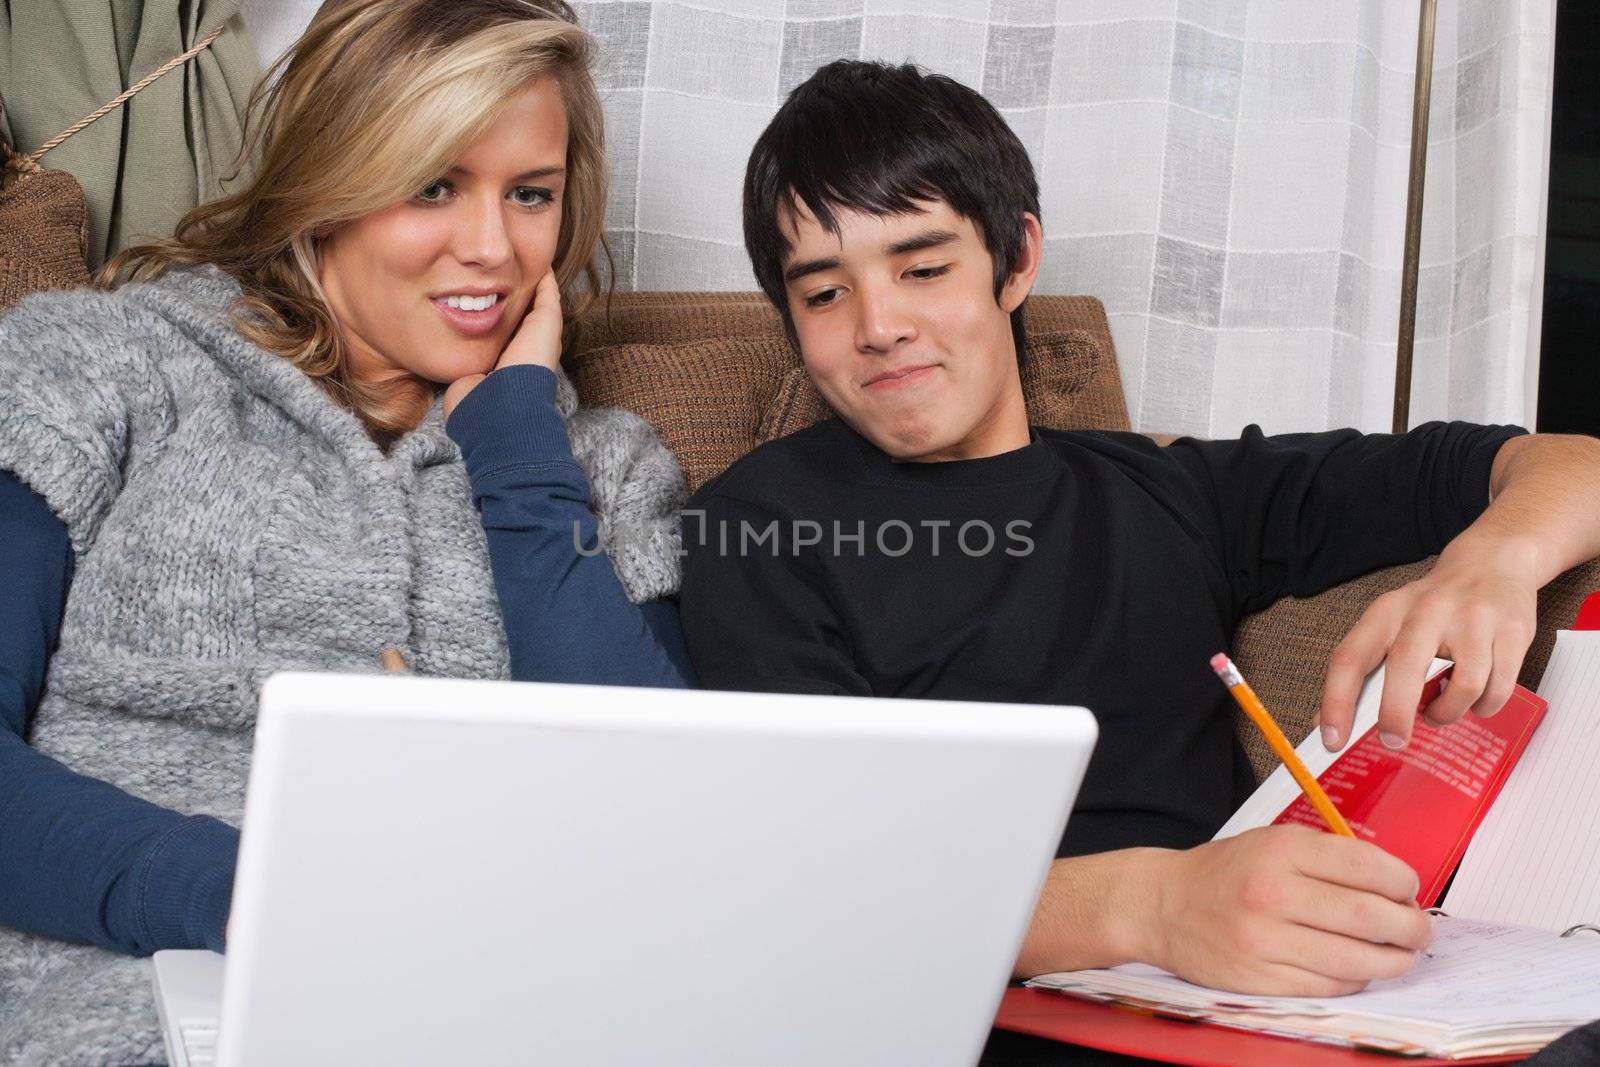 Photo of two students doing homework together.